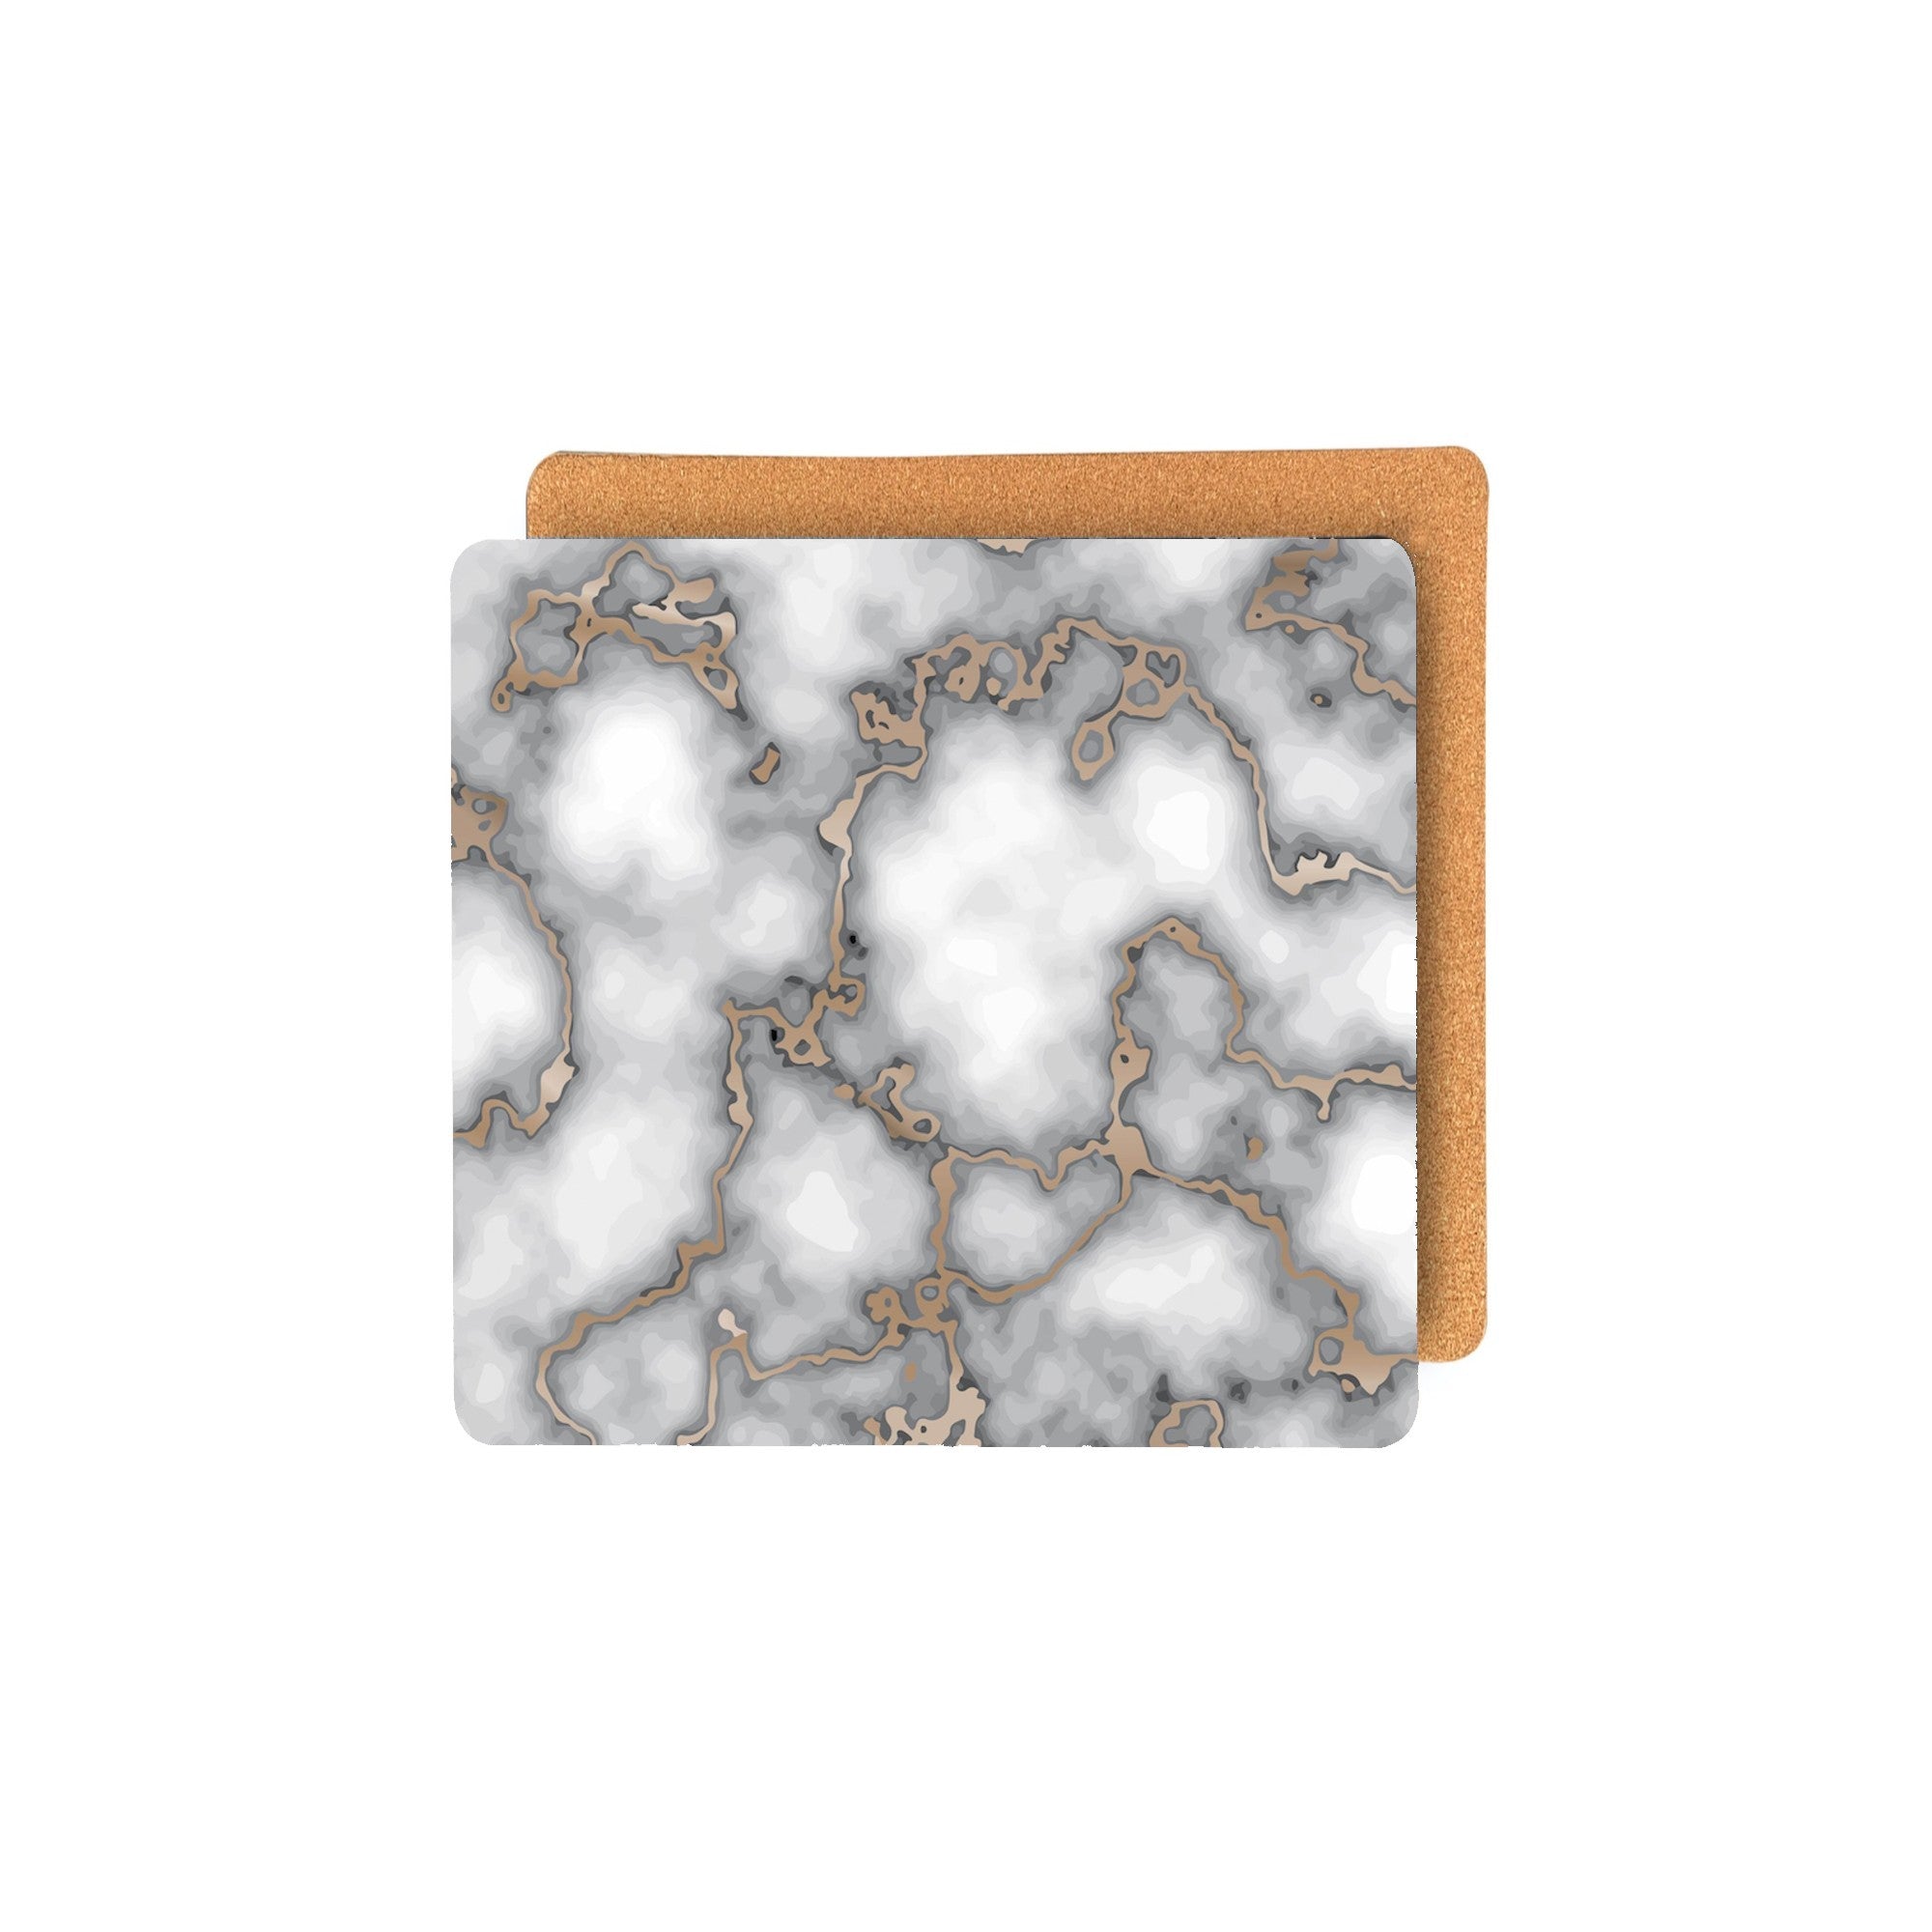 Dainty Home Marble Cork Foil Printed Marble Granite Designed Thick Cork Textured 15" x 15" Square Placemats